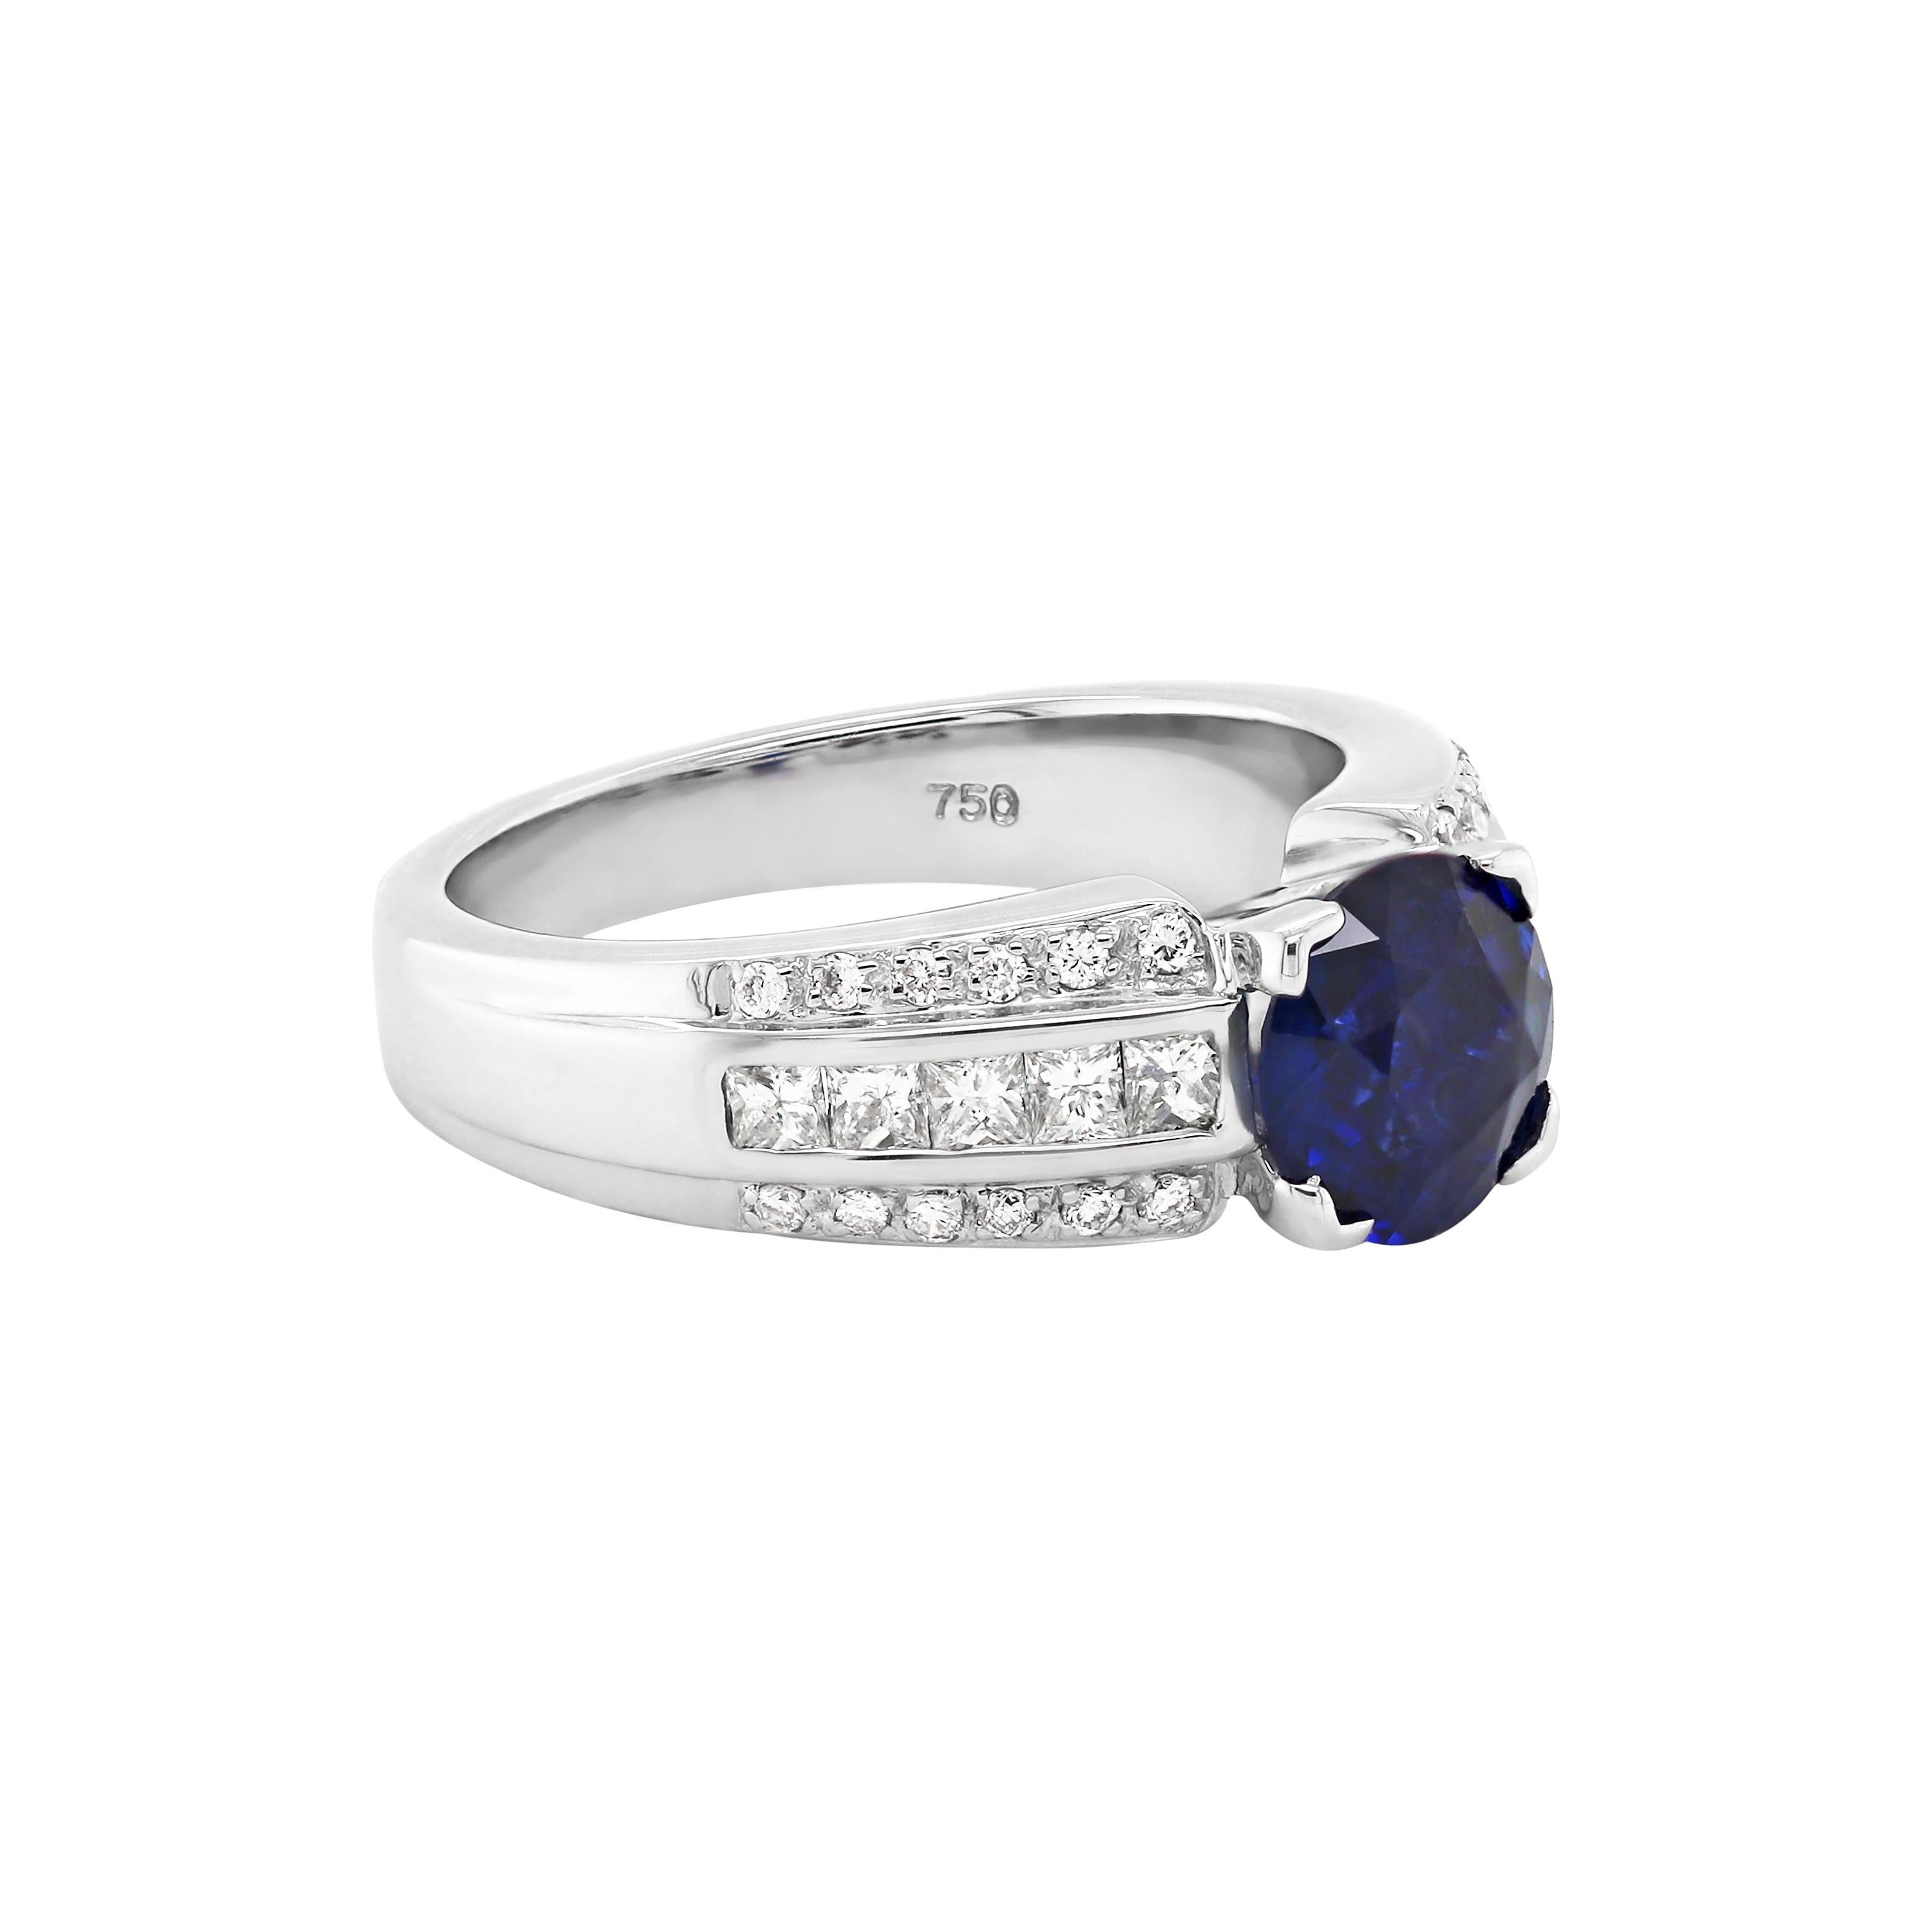 This exquisite sapphire and diamond engagement ring features a beautiful 1.81ct round shaped sapphire in the centre, in a four claw, open back setting. The sapphire is accompanied by three rows of diamonds on either side, with an approximate weight